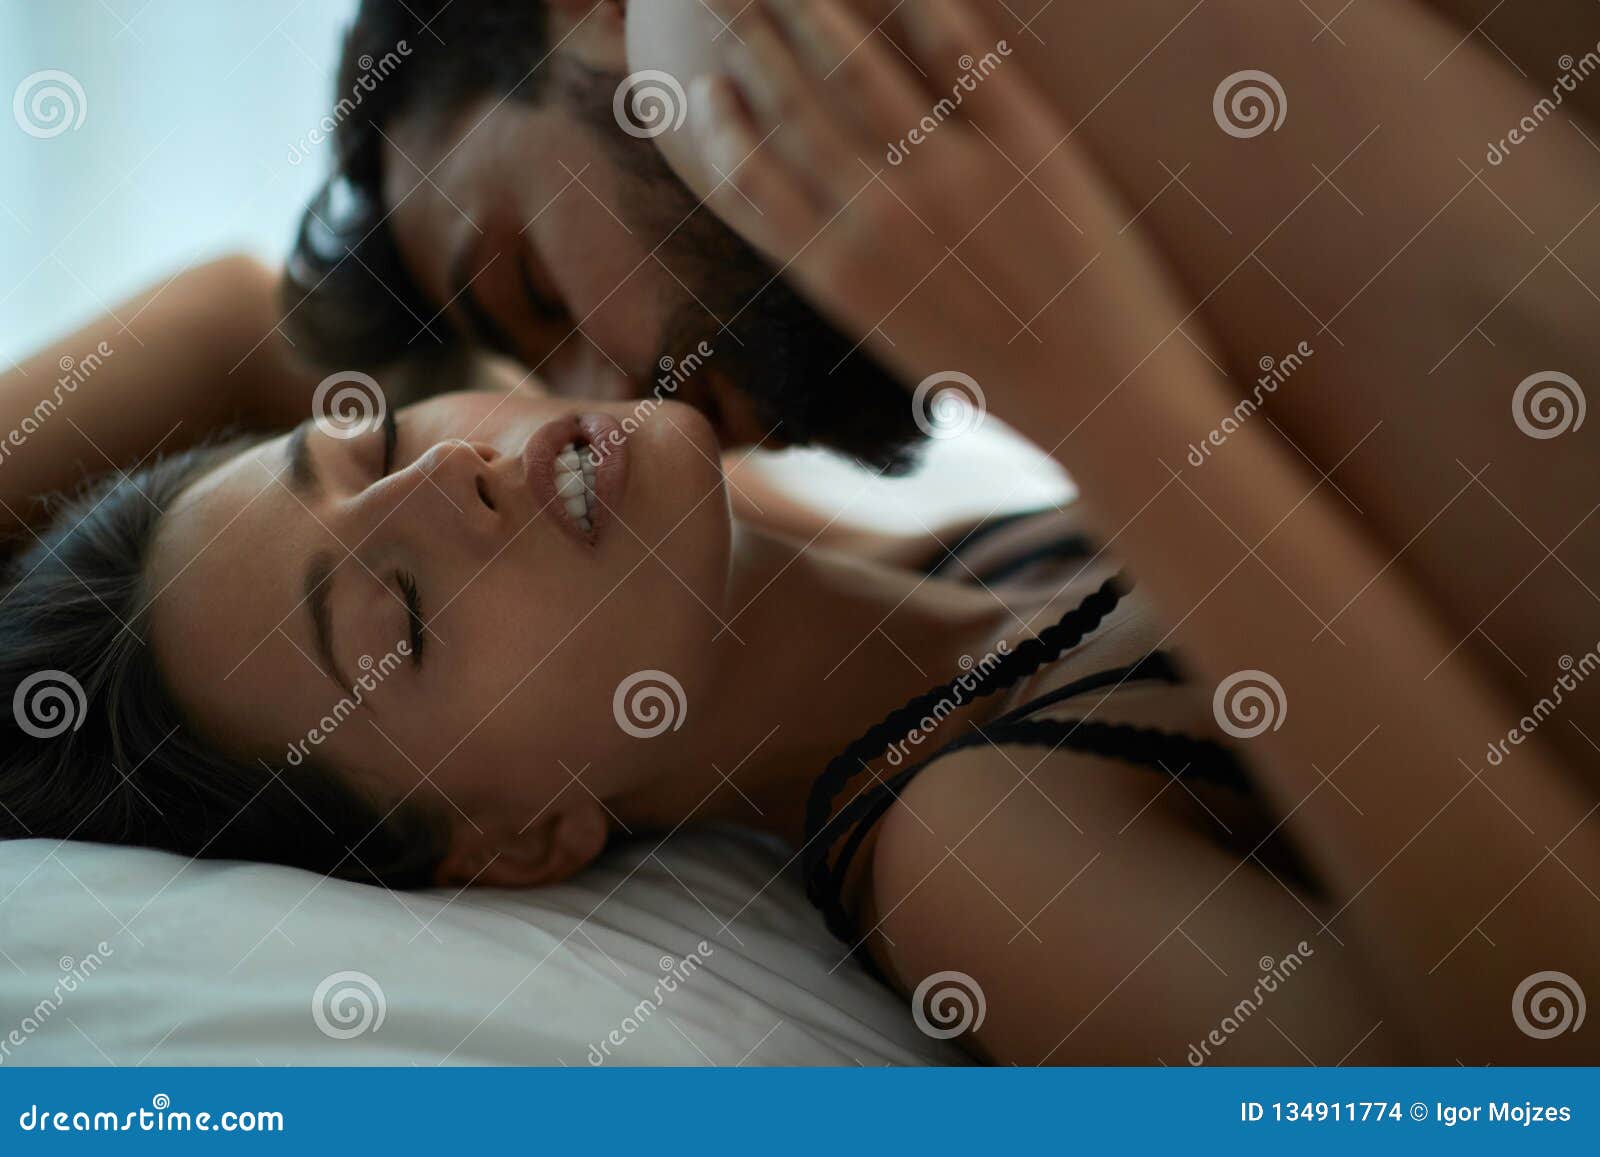 brandon luther share man and woman in bed making love photos